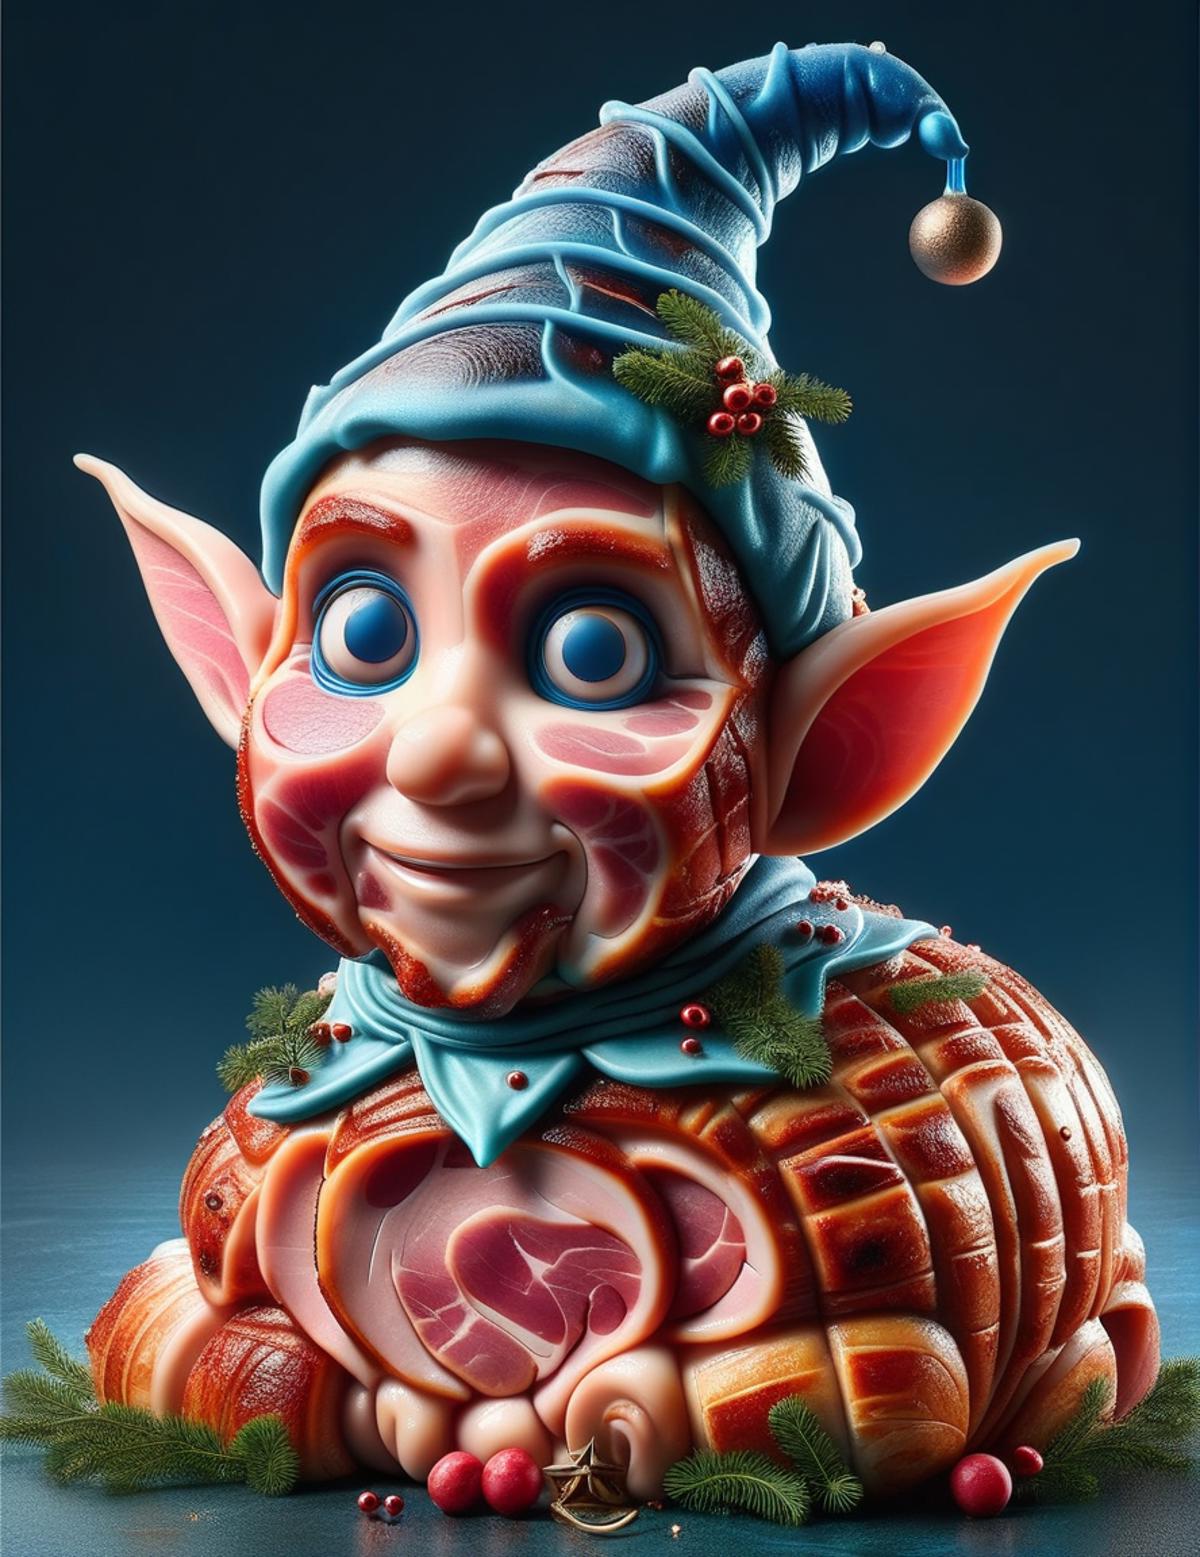 A blue elf statue made of deli meat and decorated with holly.